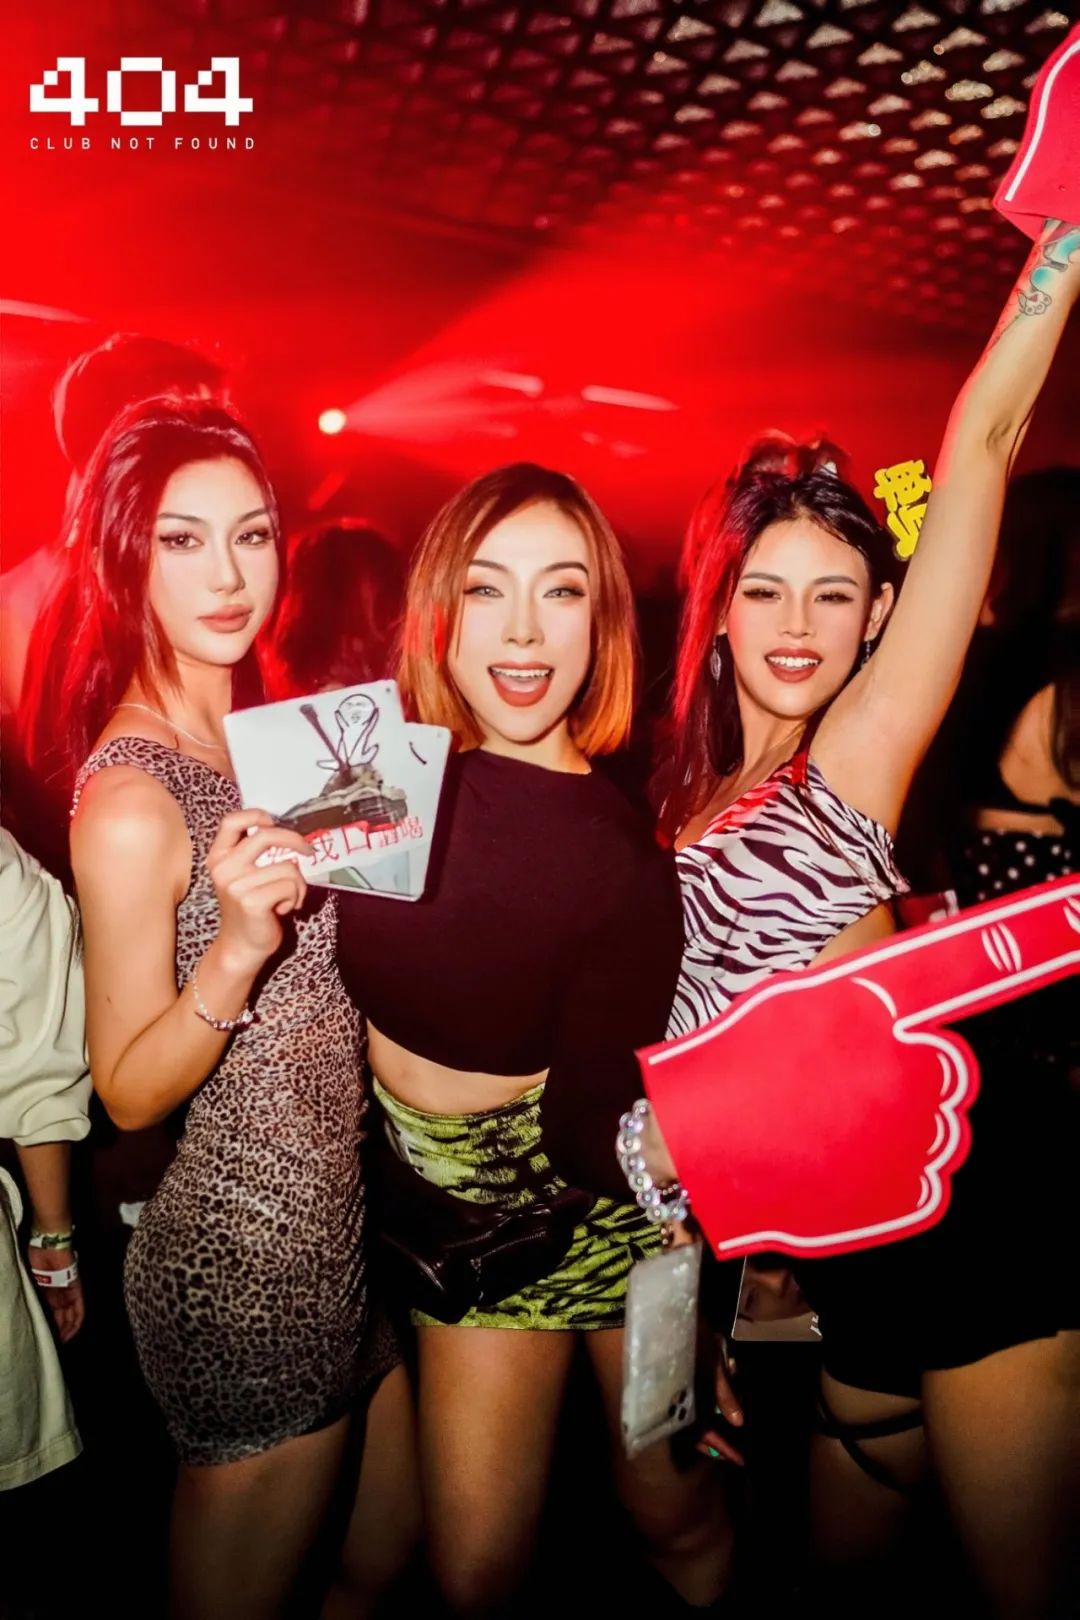 404ClubNotFound | Parties Review · MeMe Night-杭州404酒吧/404ClubNotFound